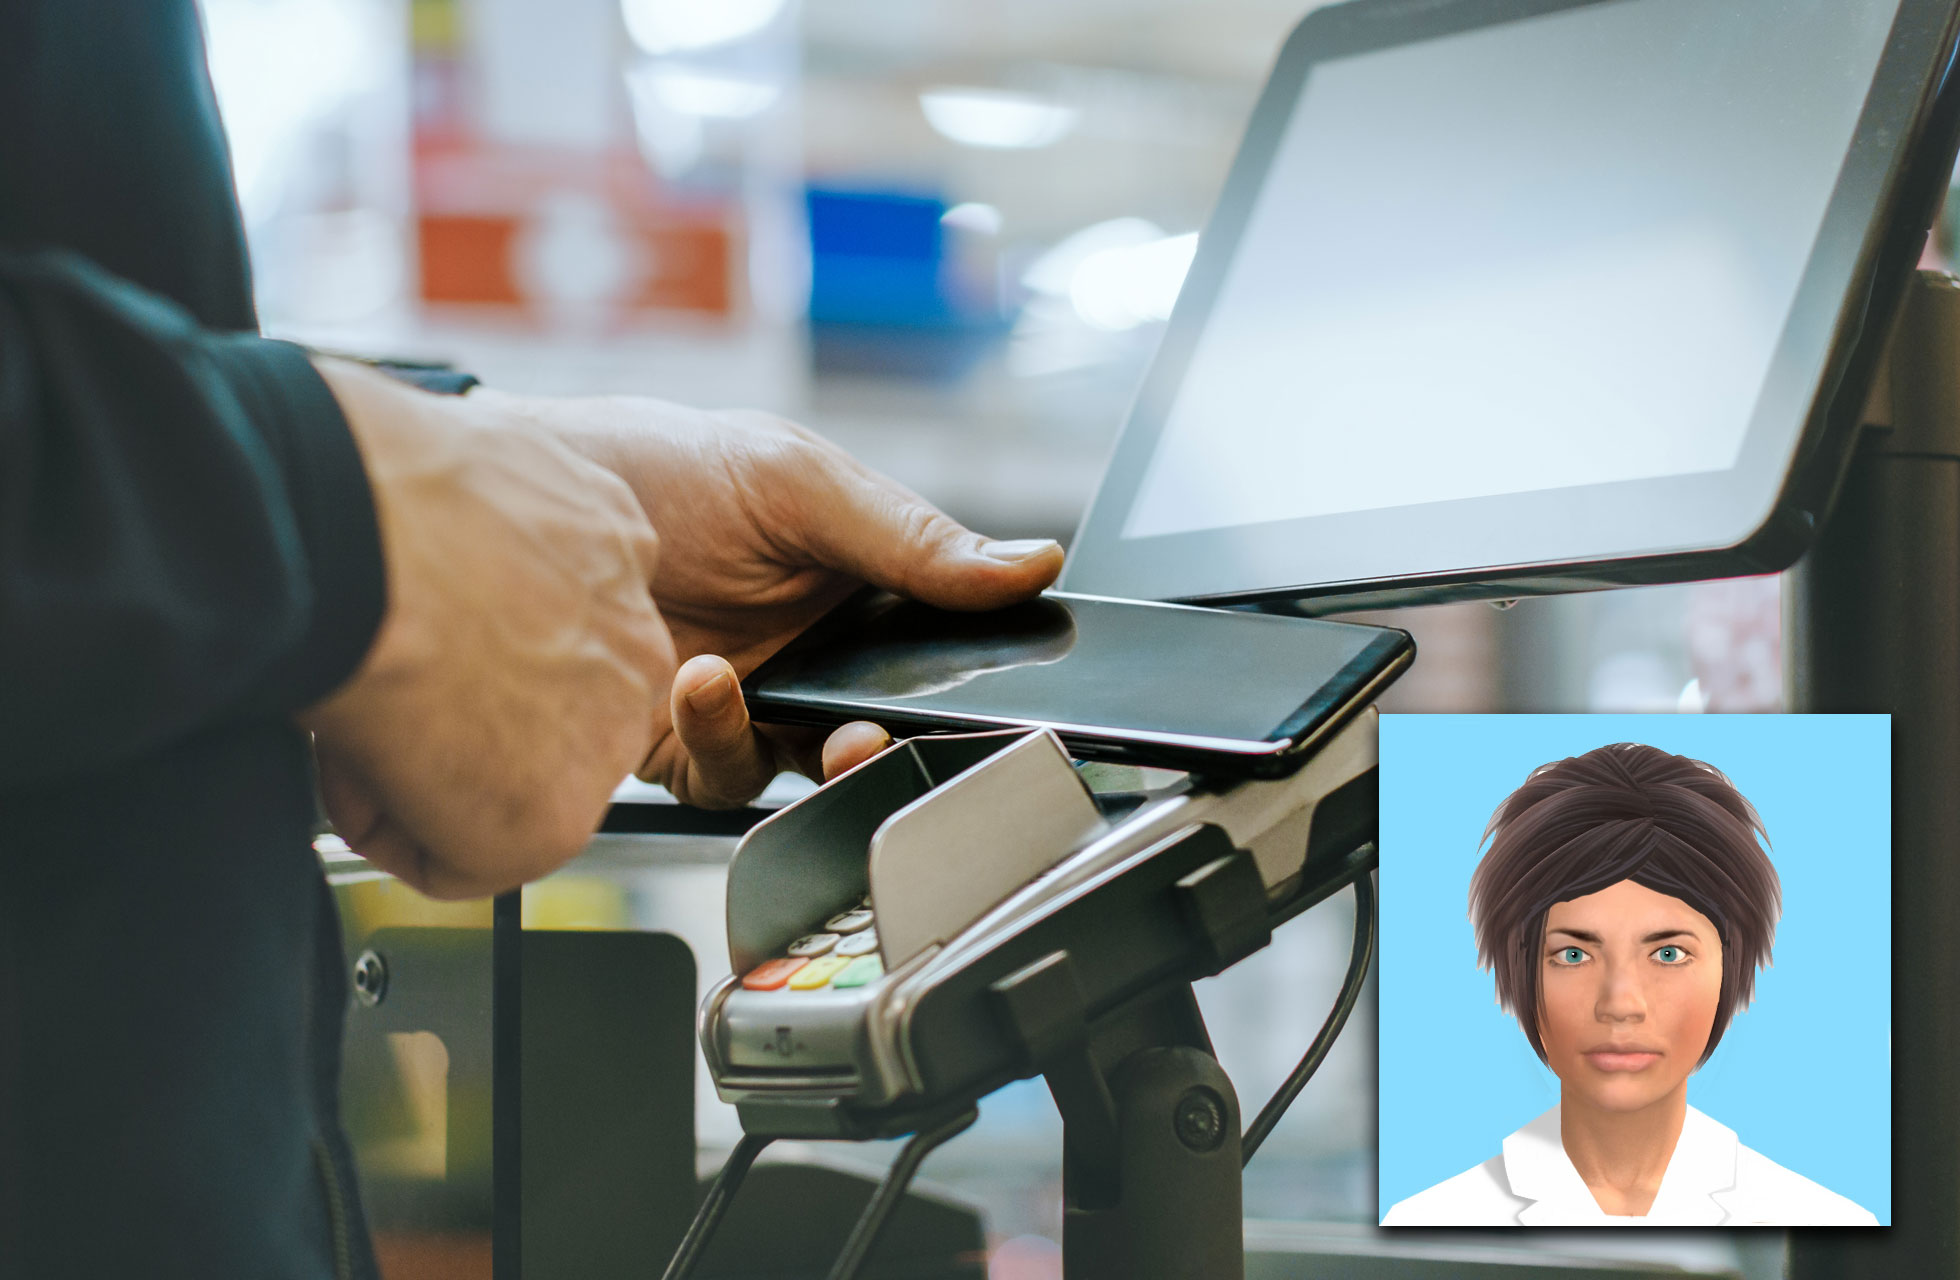 Digitised faces may reduce shoplifting risk at self-service checkouts